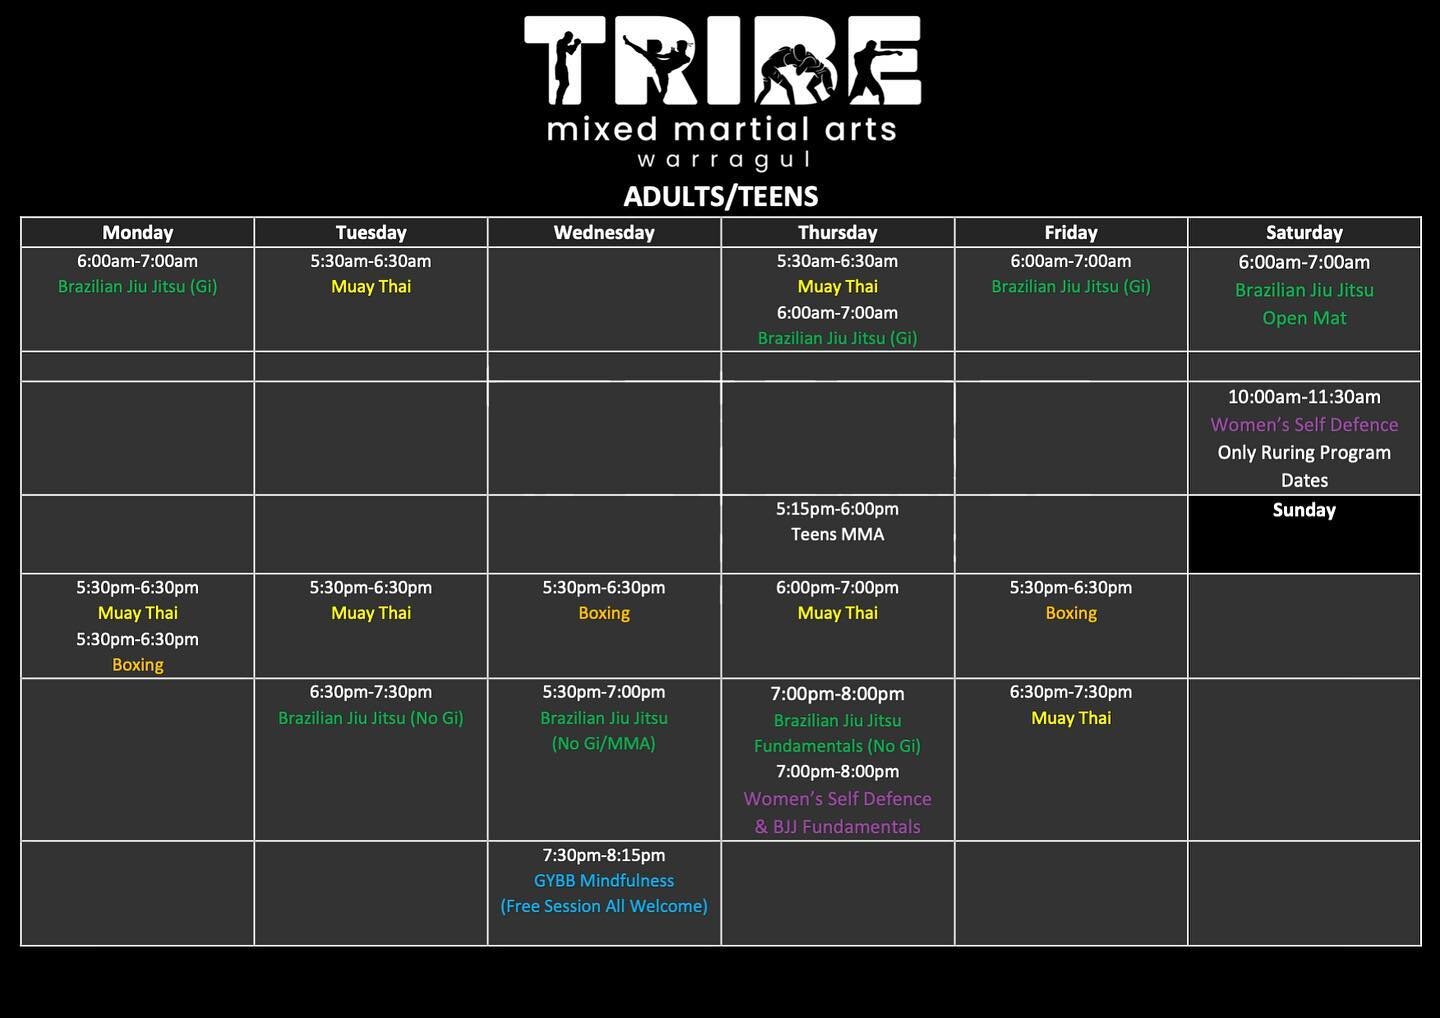 Winter timetable updates! With the cooler weather, we&rsquo;ve made some minor changes to our timetable - an extended Wednesday night session, and the Women&rsquo;s class now aligning to BJJ foundations on Thursday. Wednesday morning BJJ will now be 